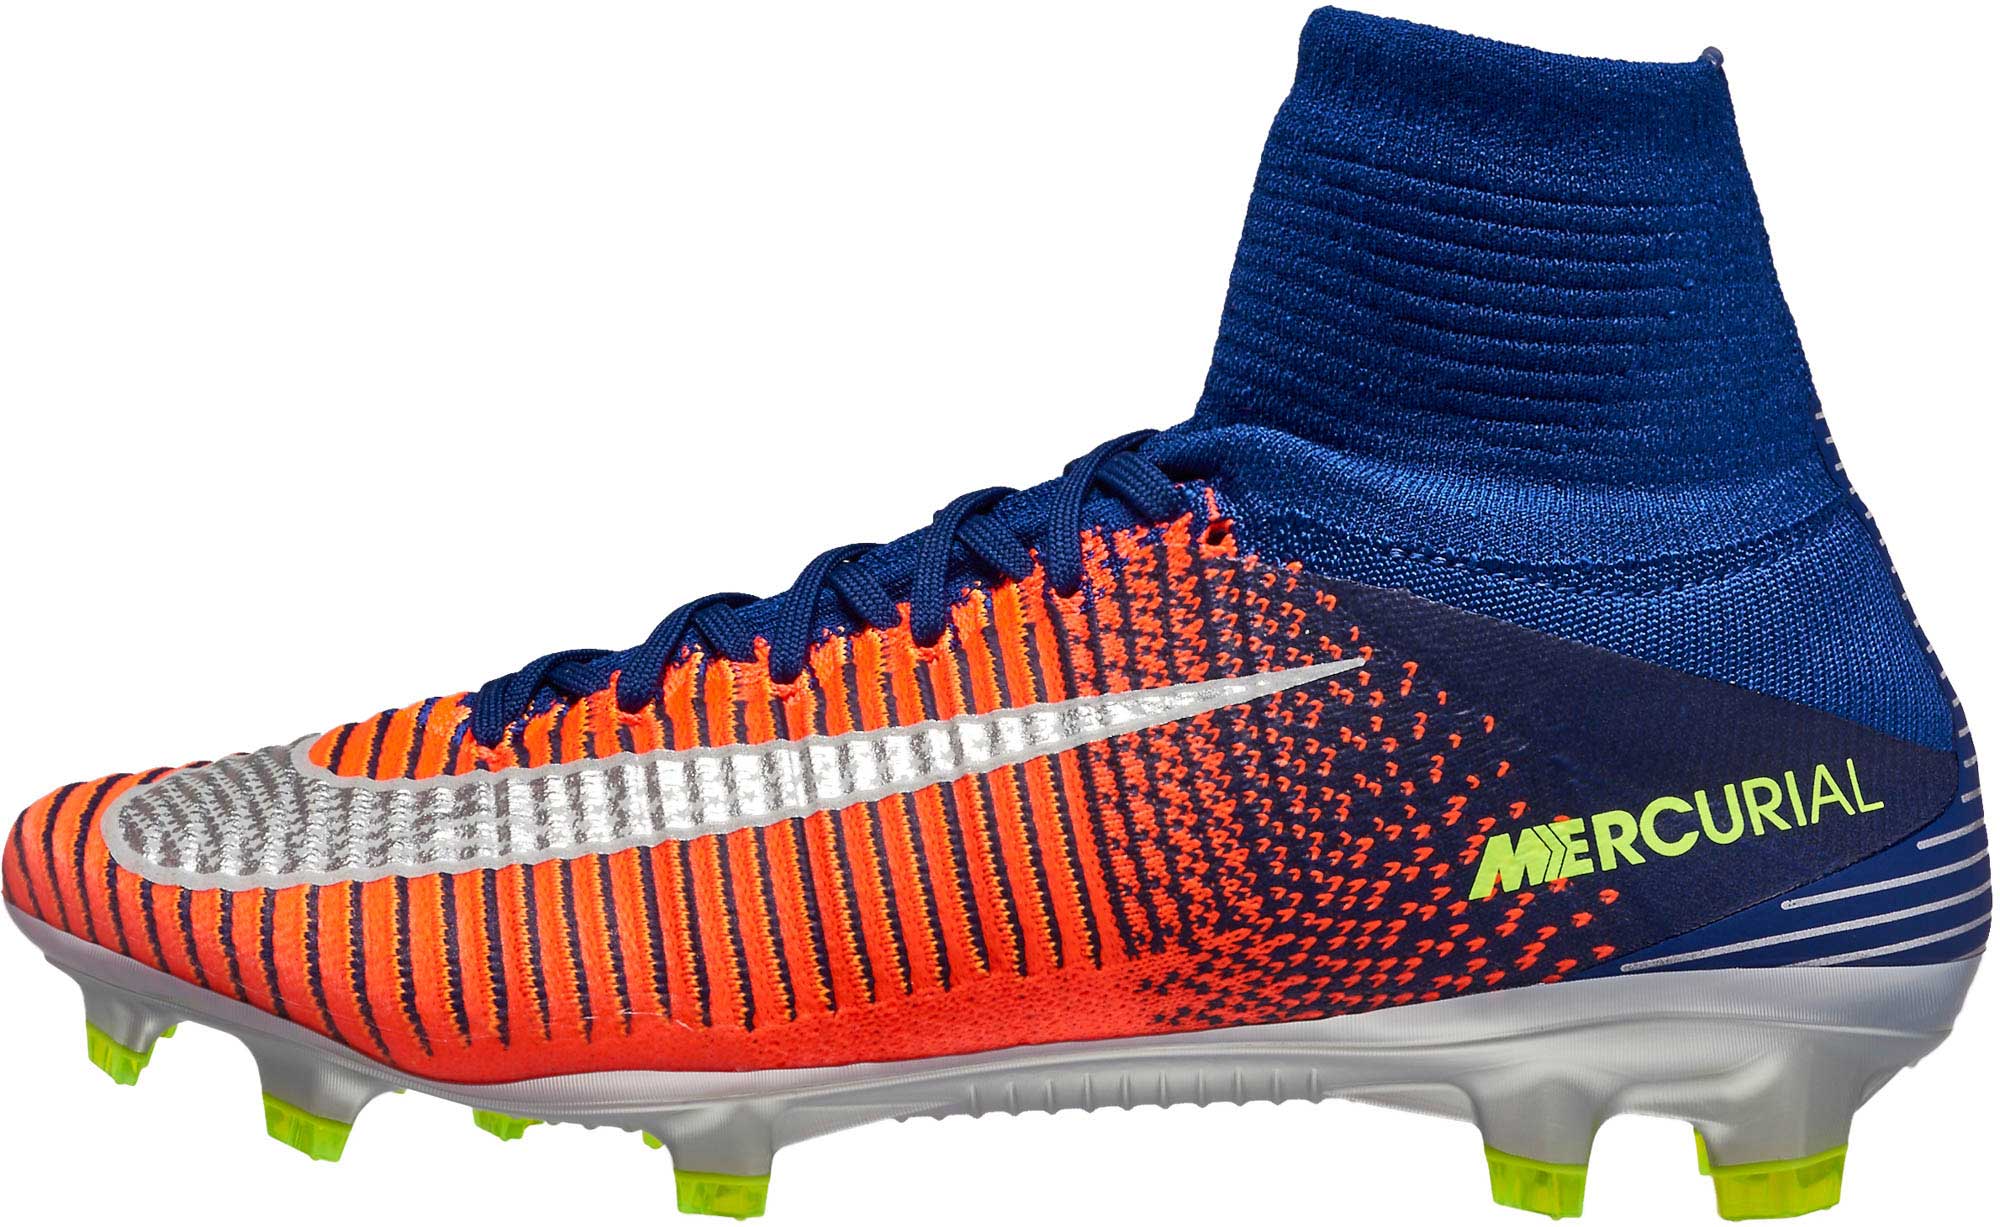 Nike Mercurial Superfly V FG Cleats 